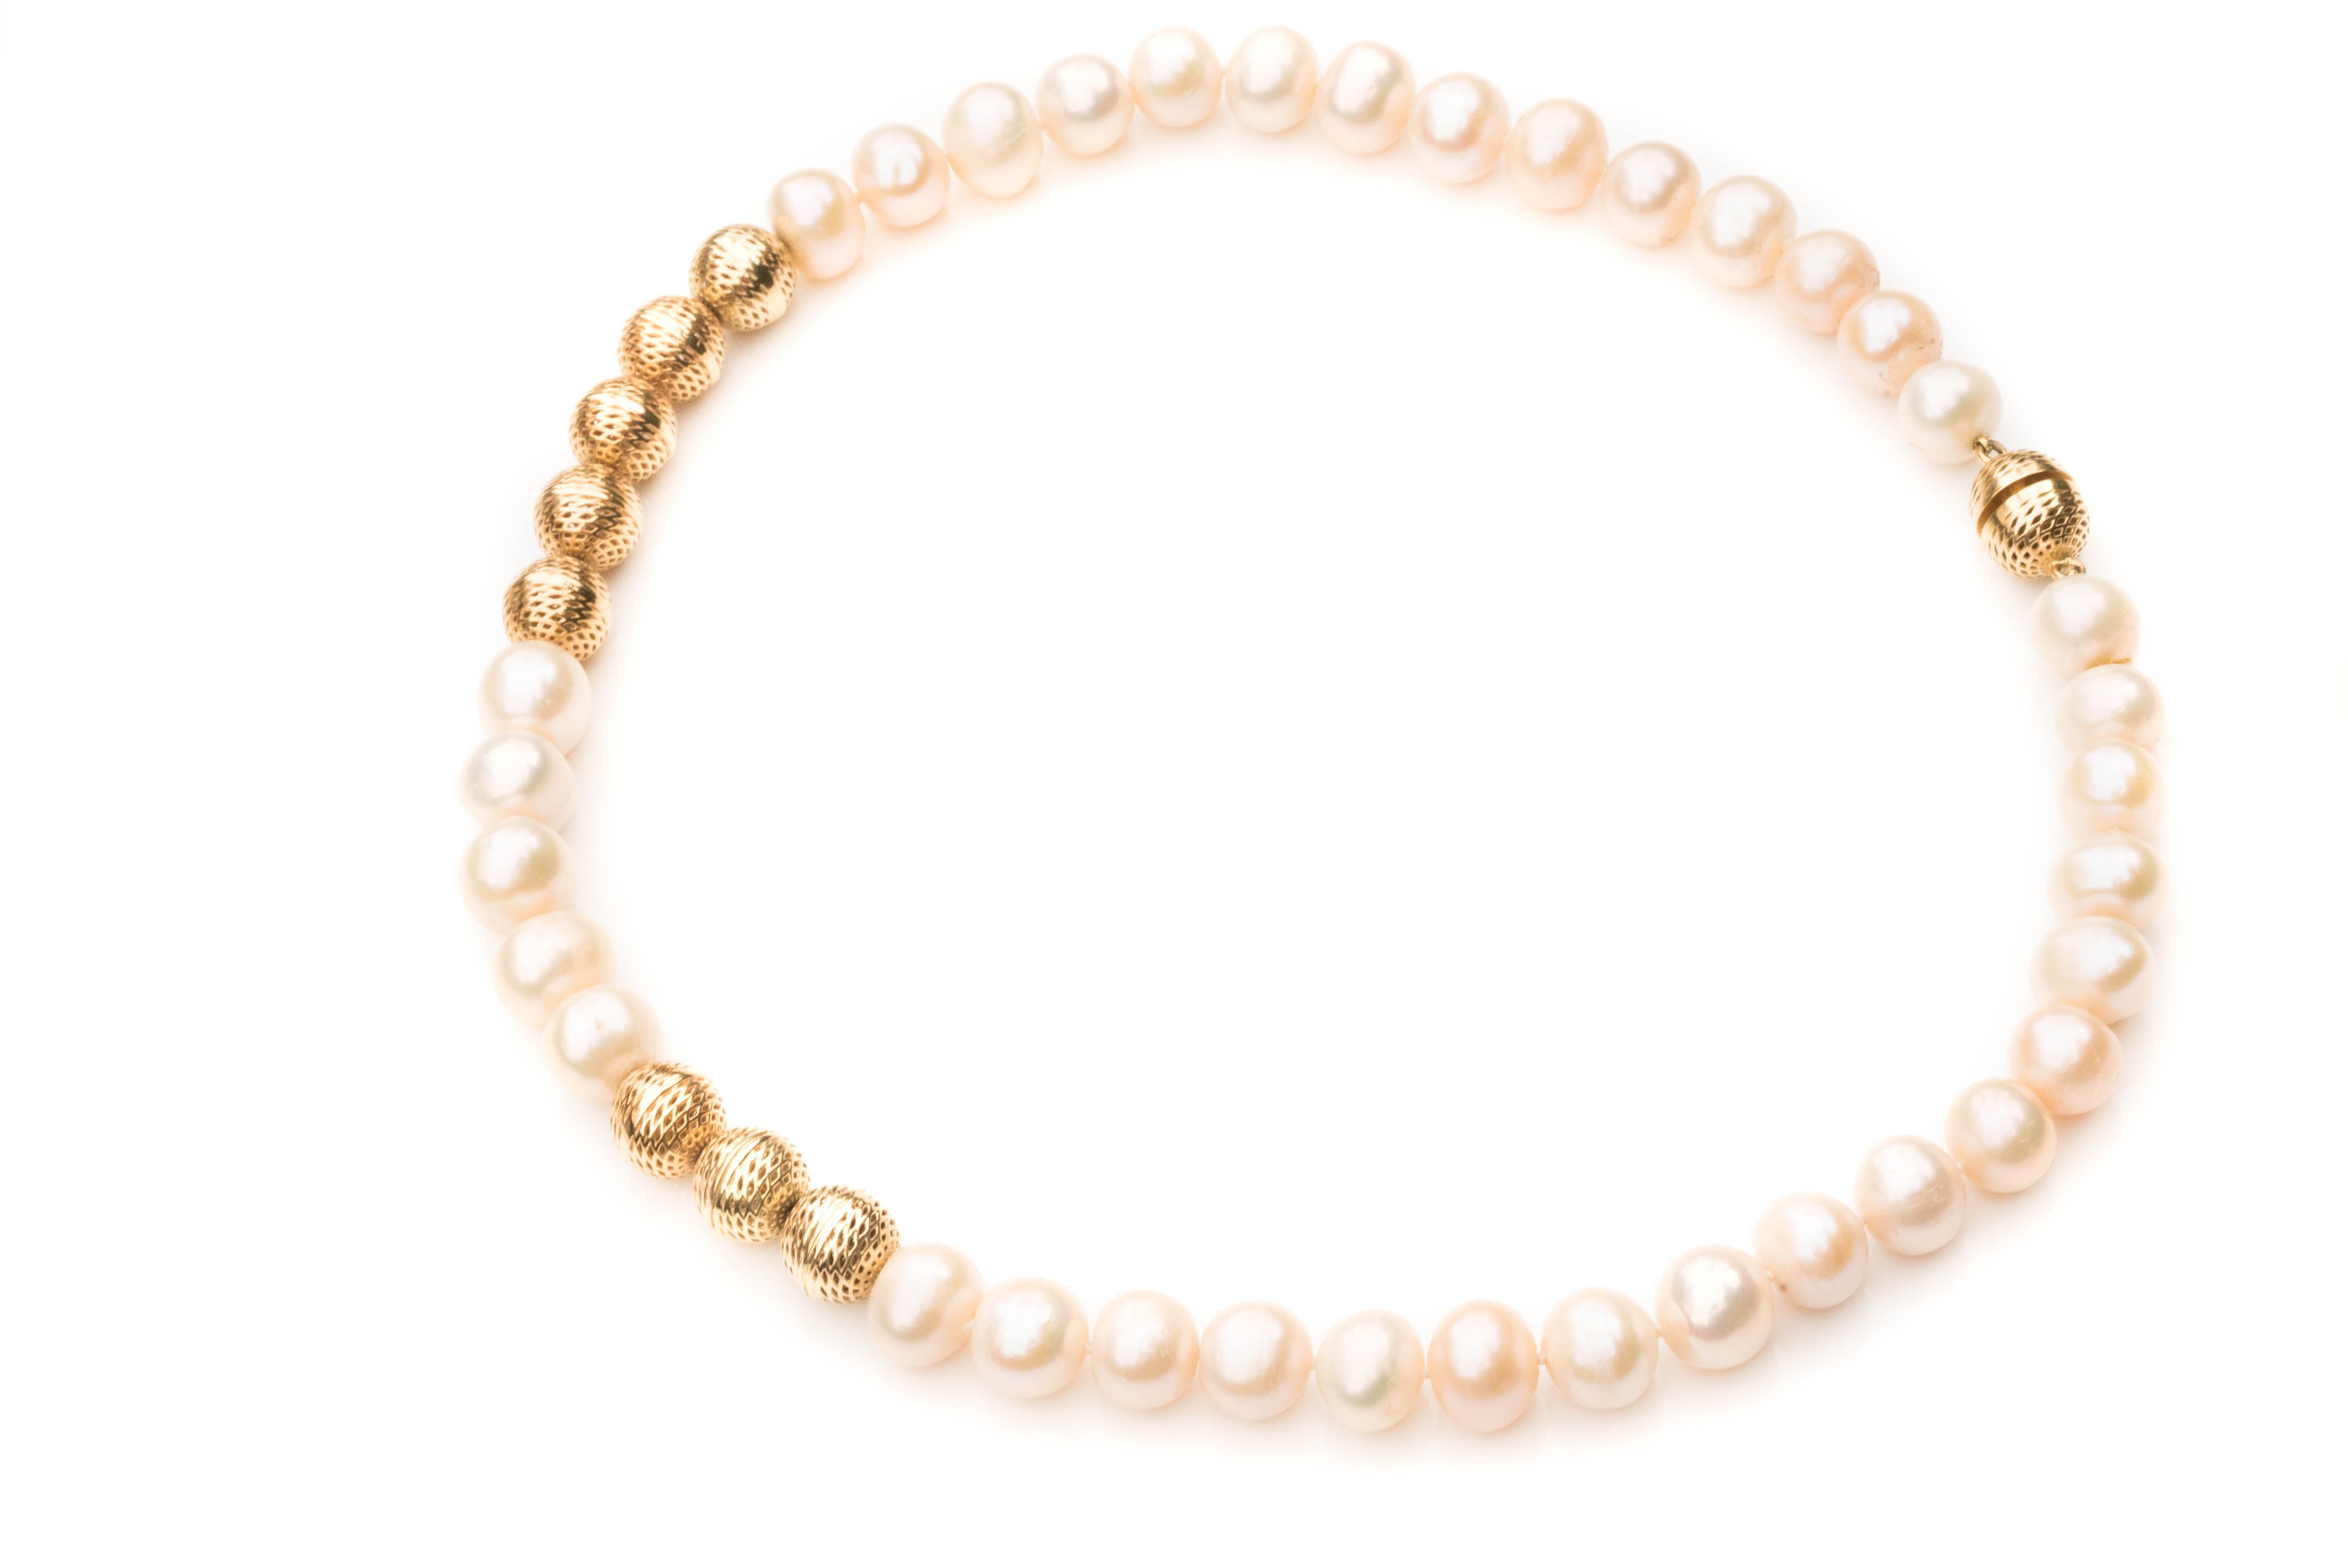 14k  beads, Sweetwater Pearls Collier